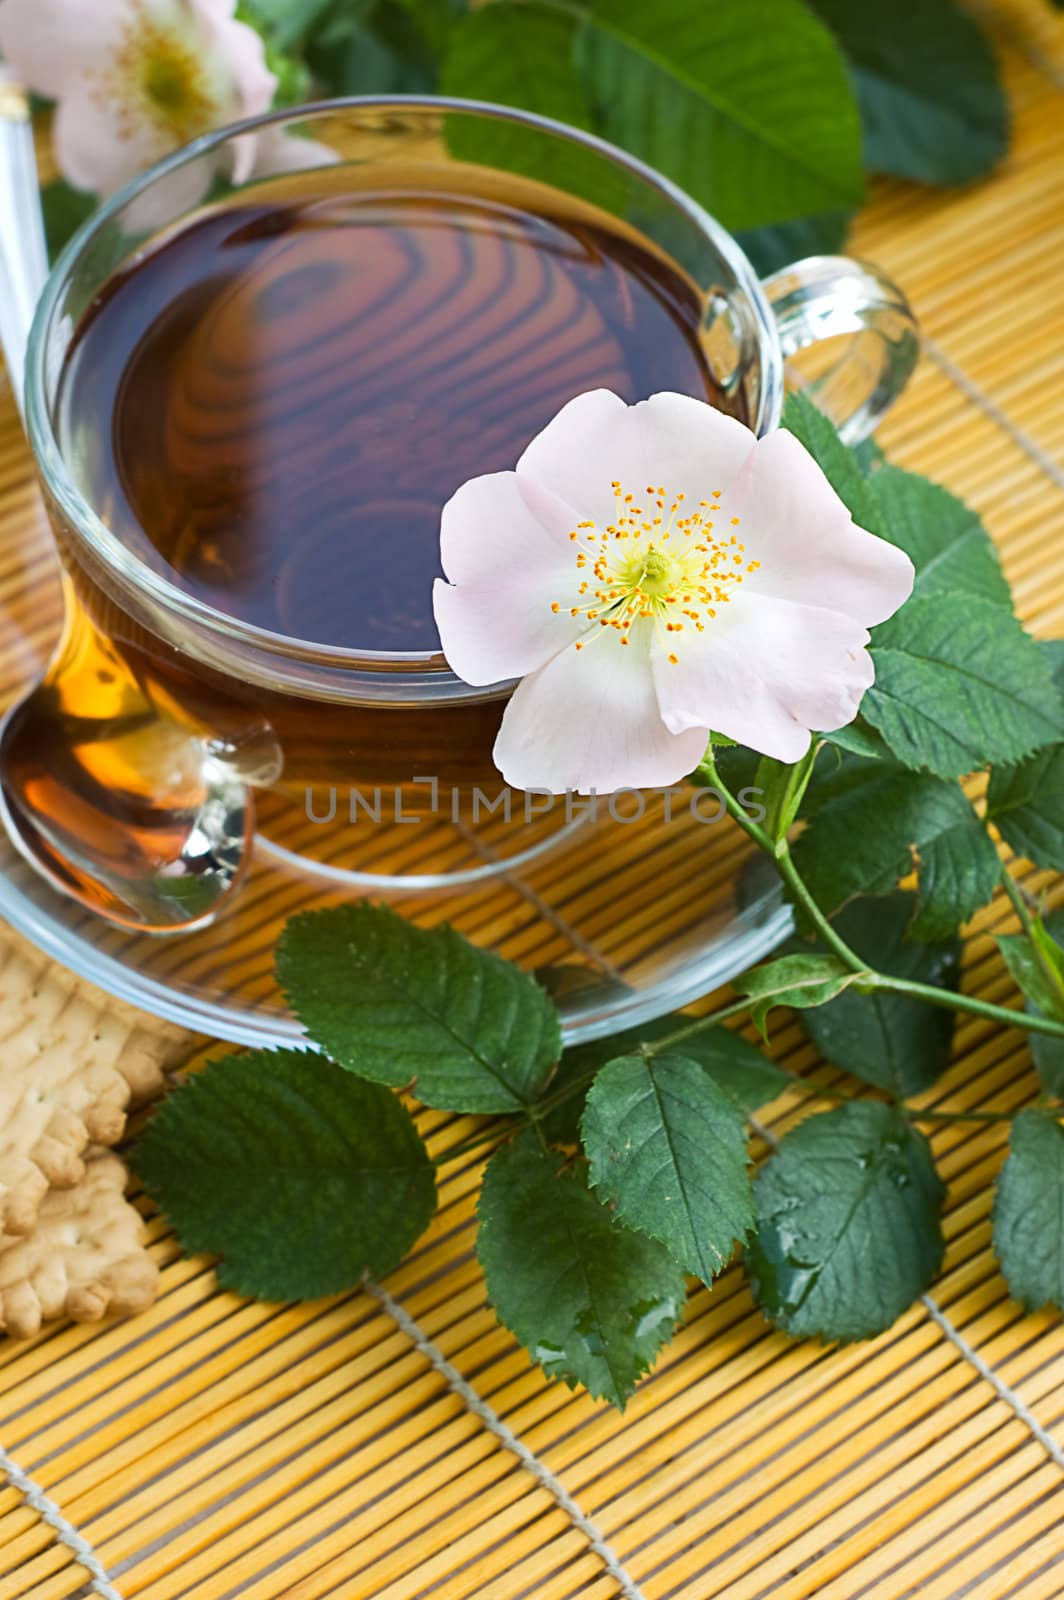 Cup of tea with dog-rose blossom